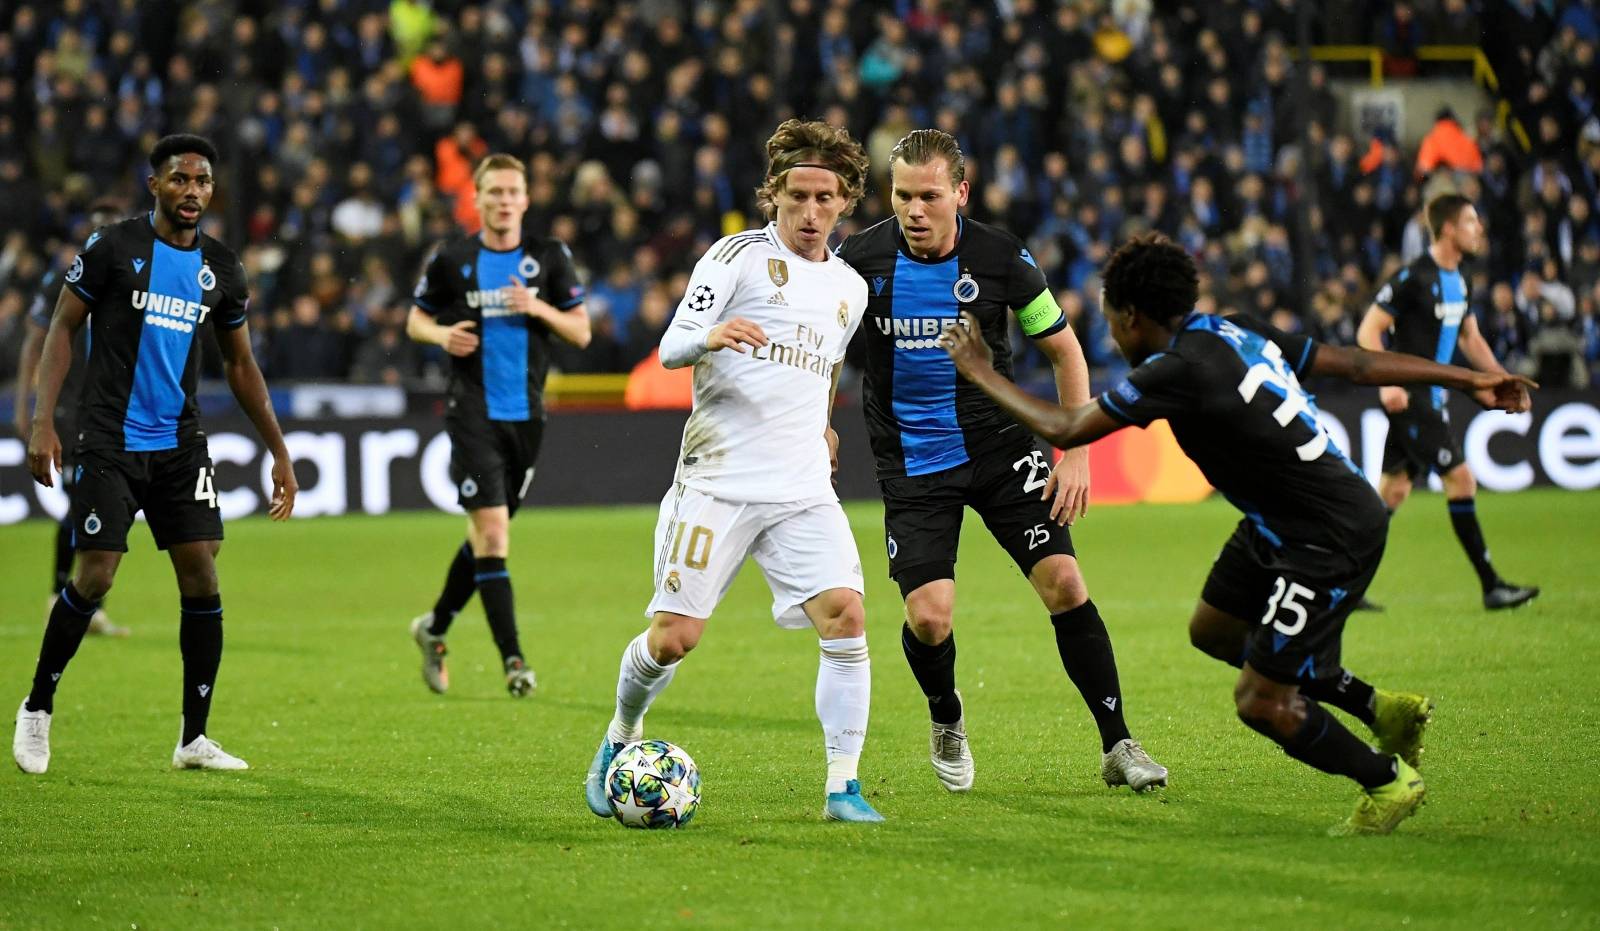 Champions League - Group A - Club Brugge v Real Madrid